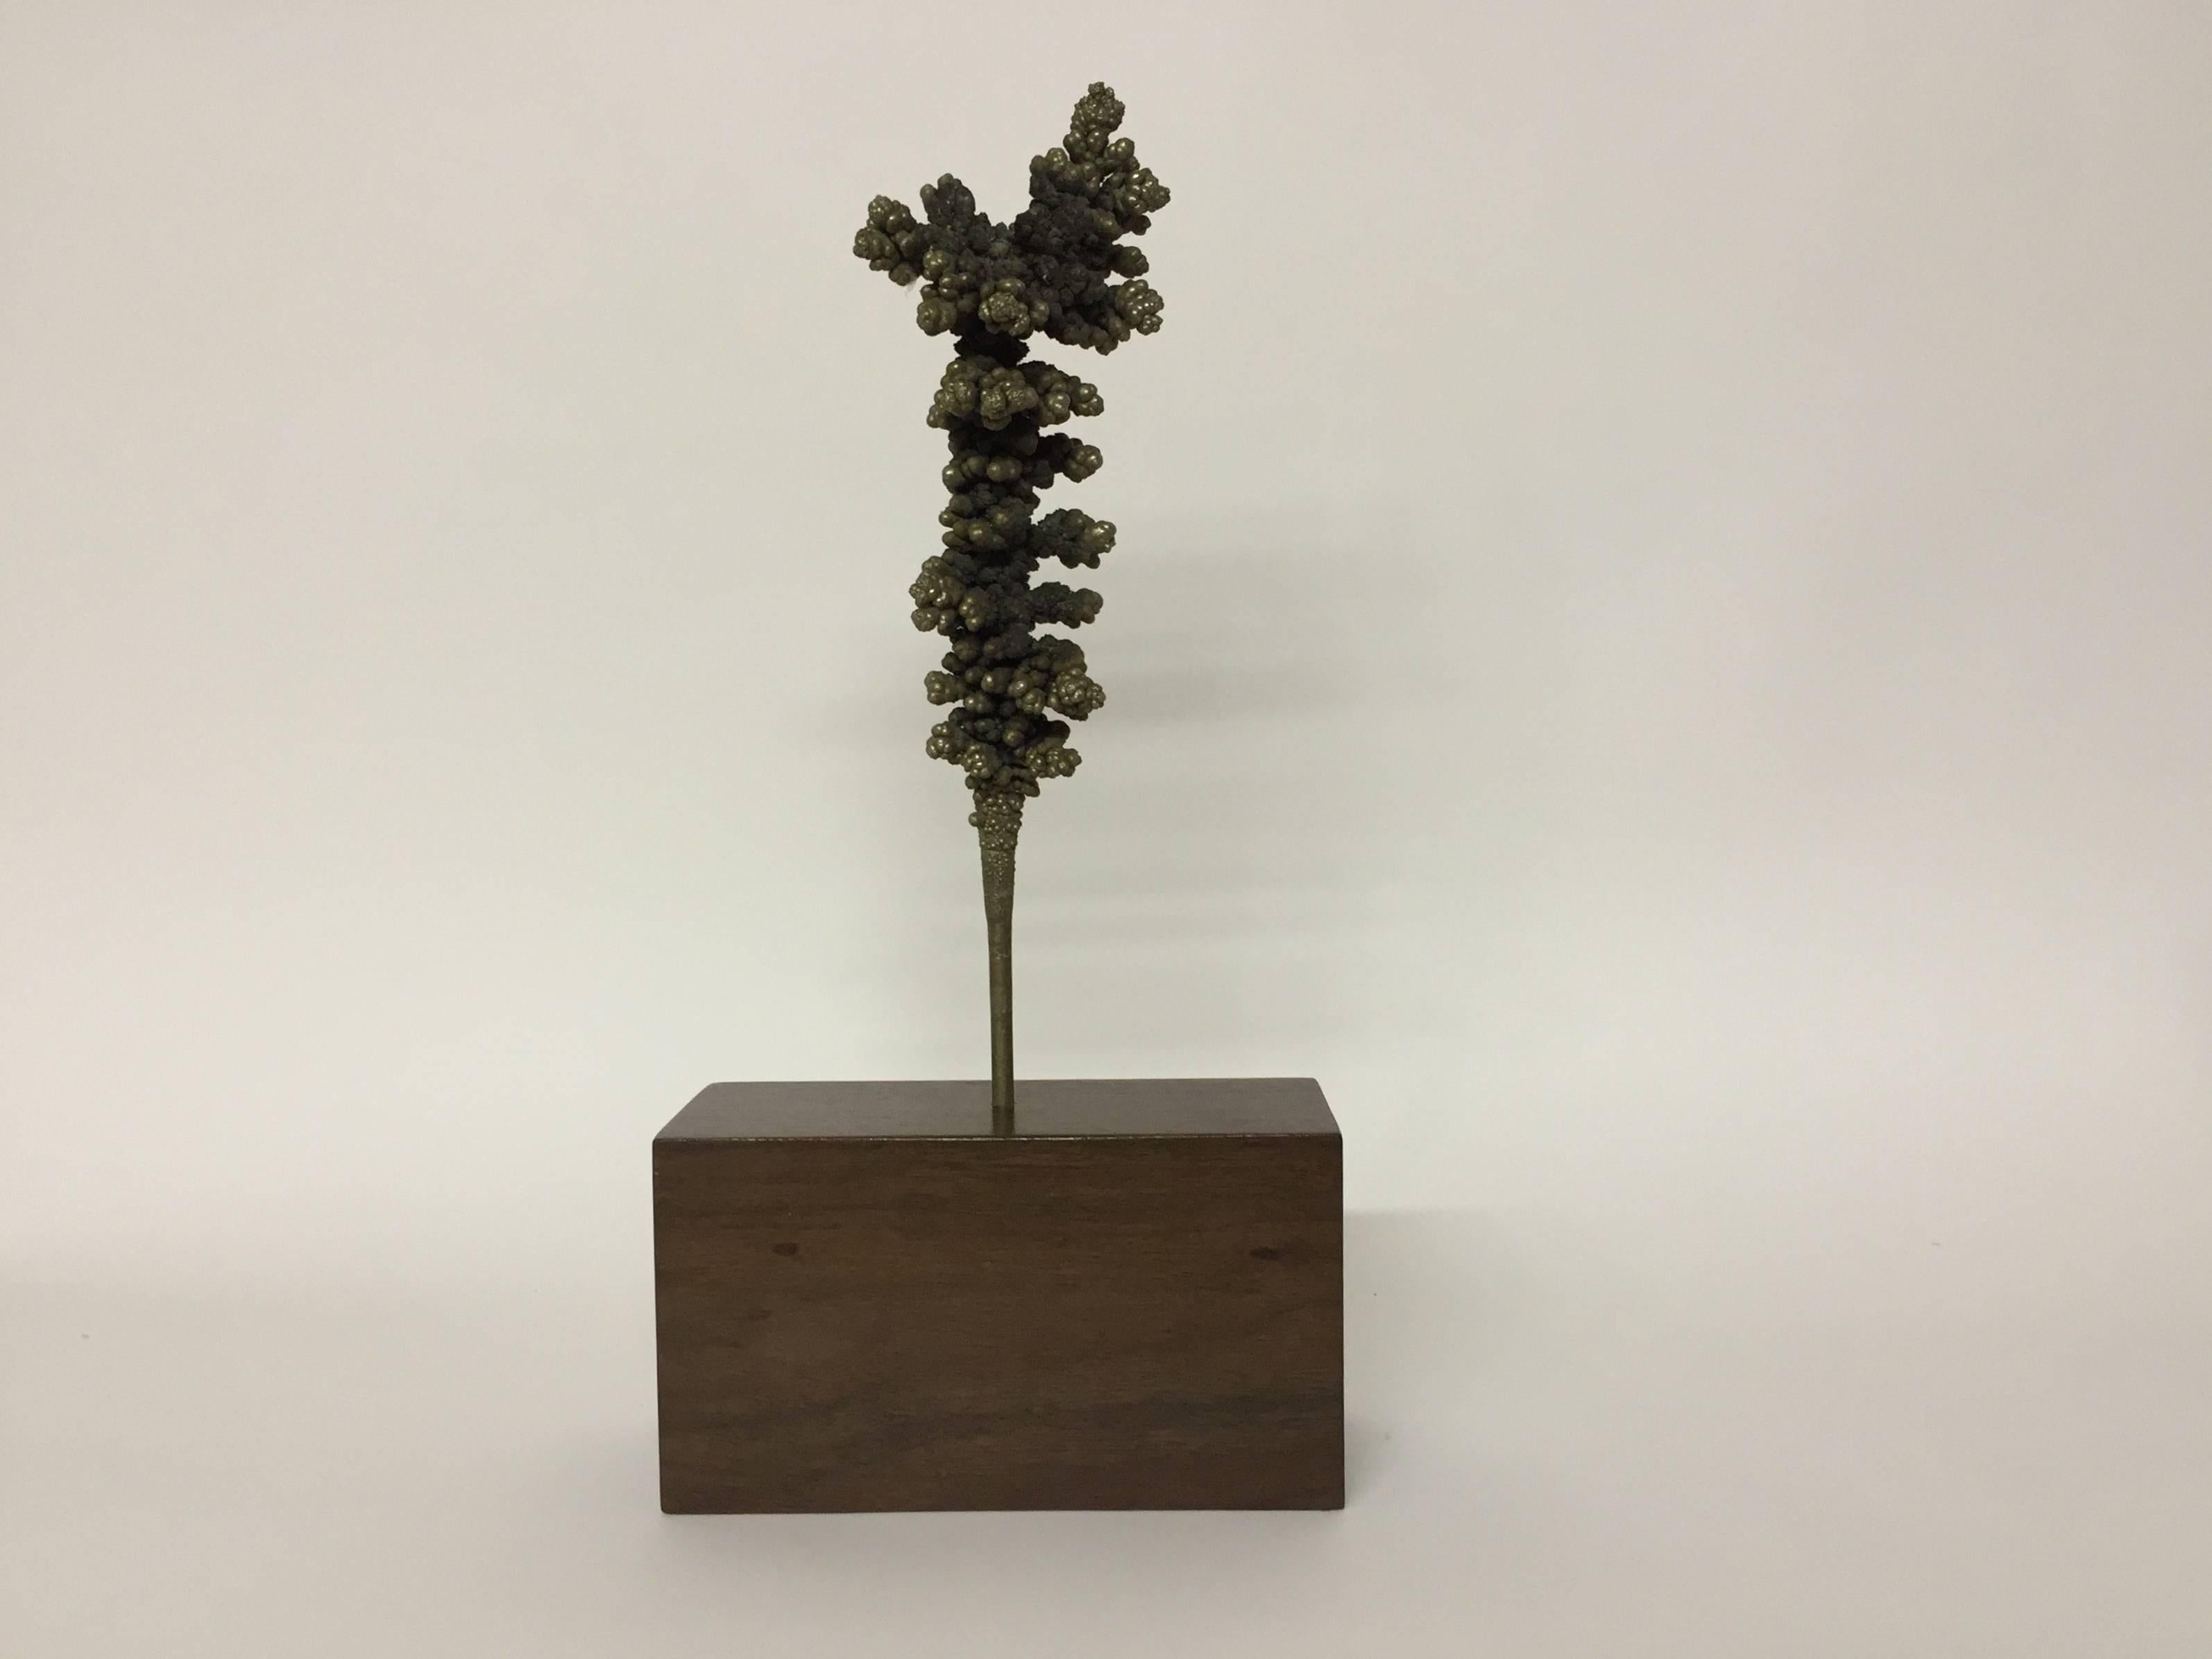 Wonderful tactile metal sculpture in the manner of Klaus Ihlenfeld, one time assistant to Harry Bertoia. The sculpture rests on a solid piece of walnut and is made of metal alloy, circa 1960. The overall height is 15.75